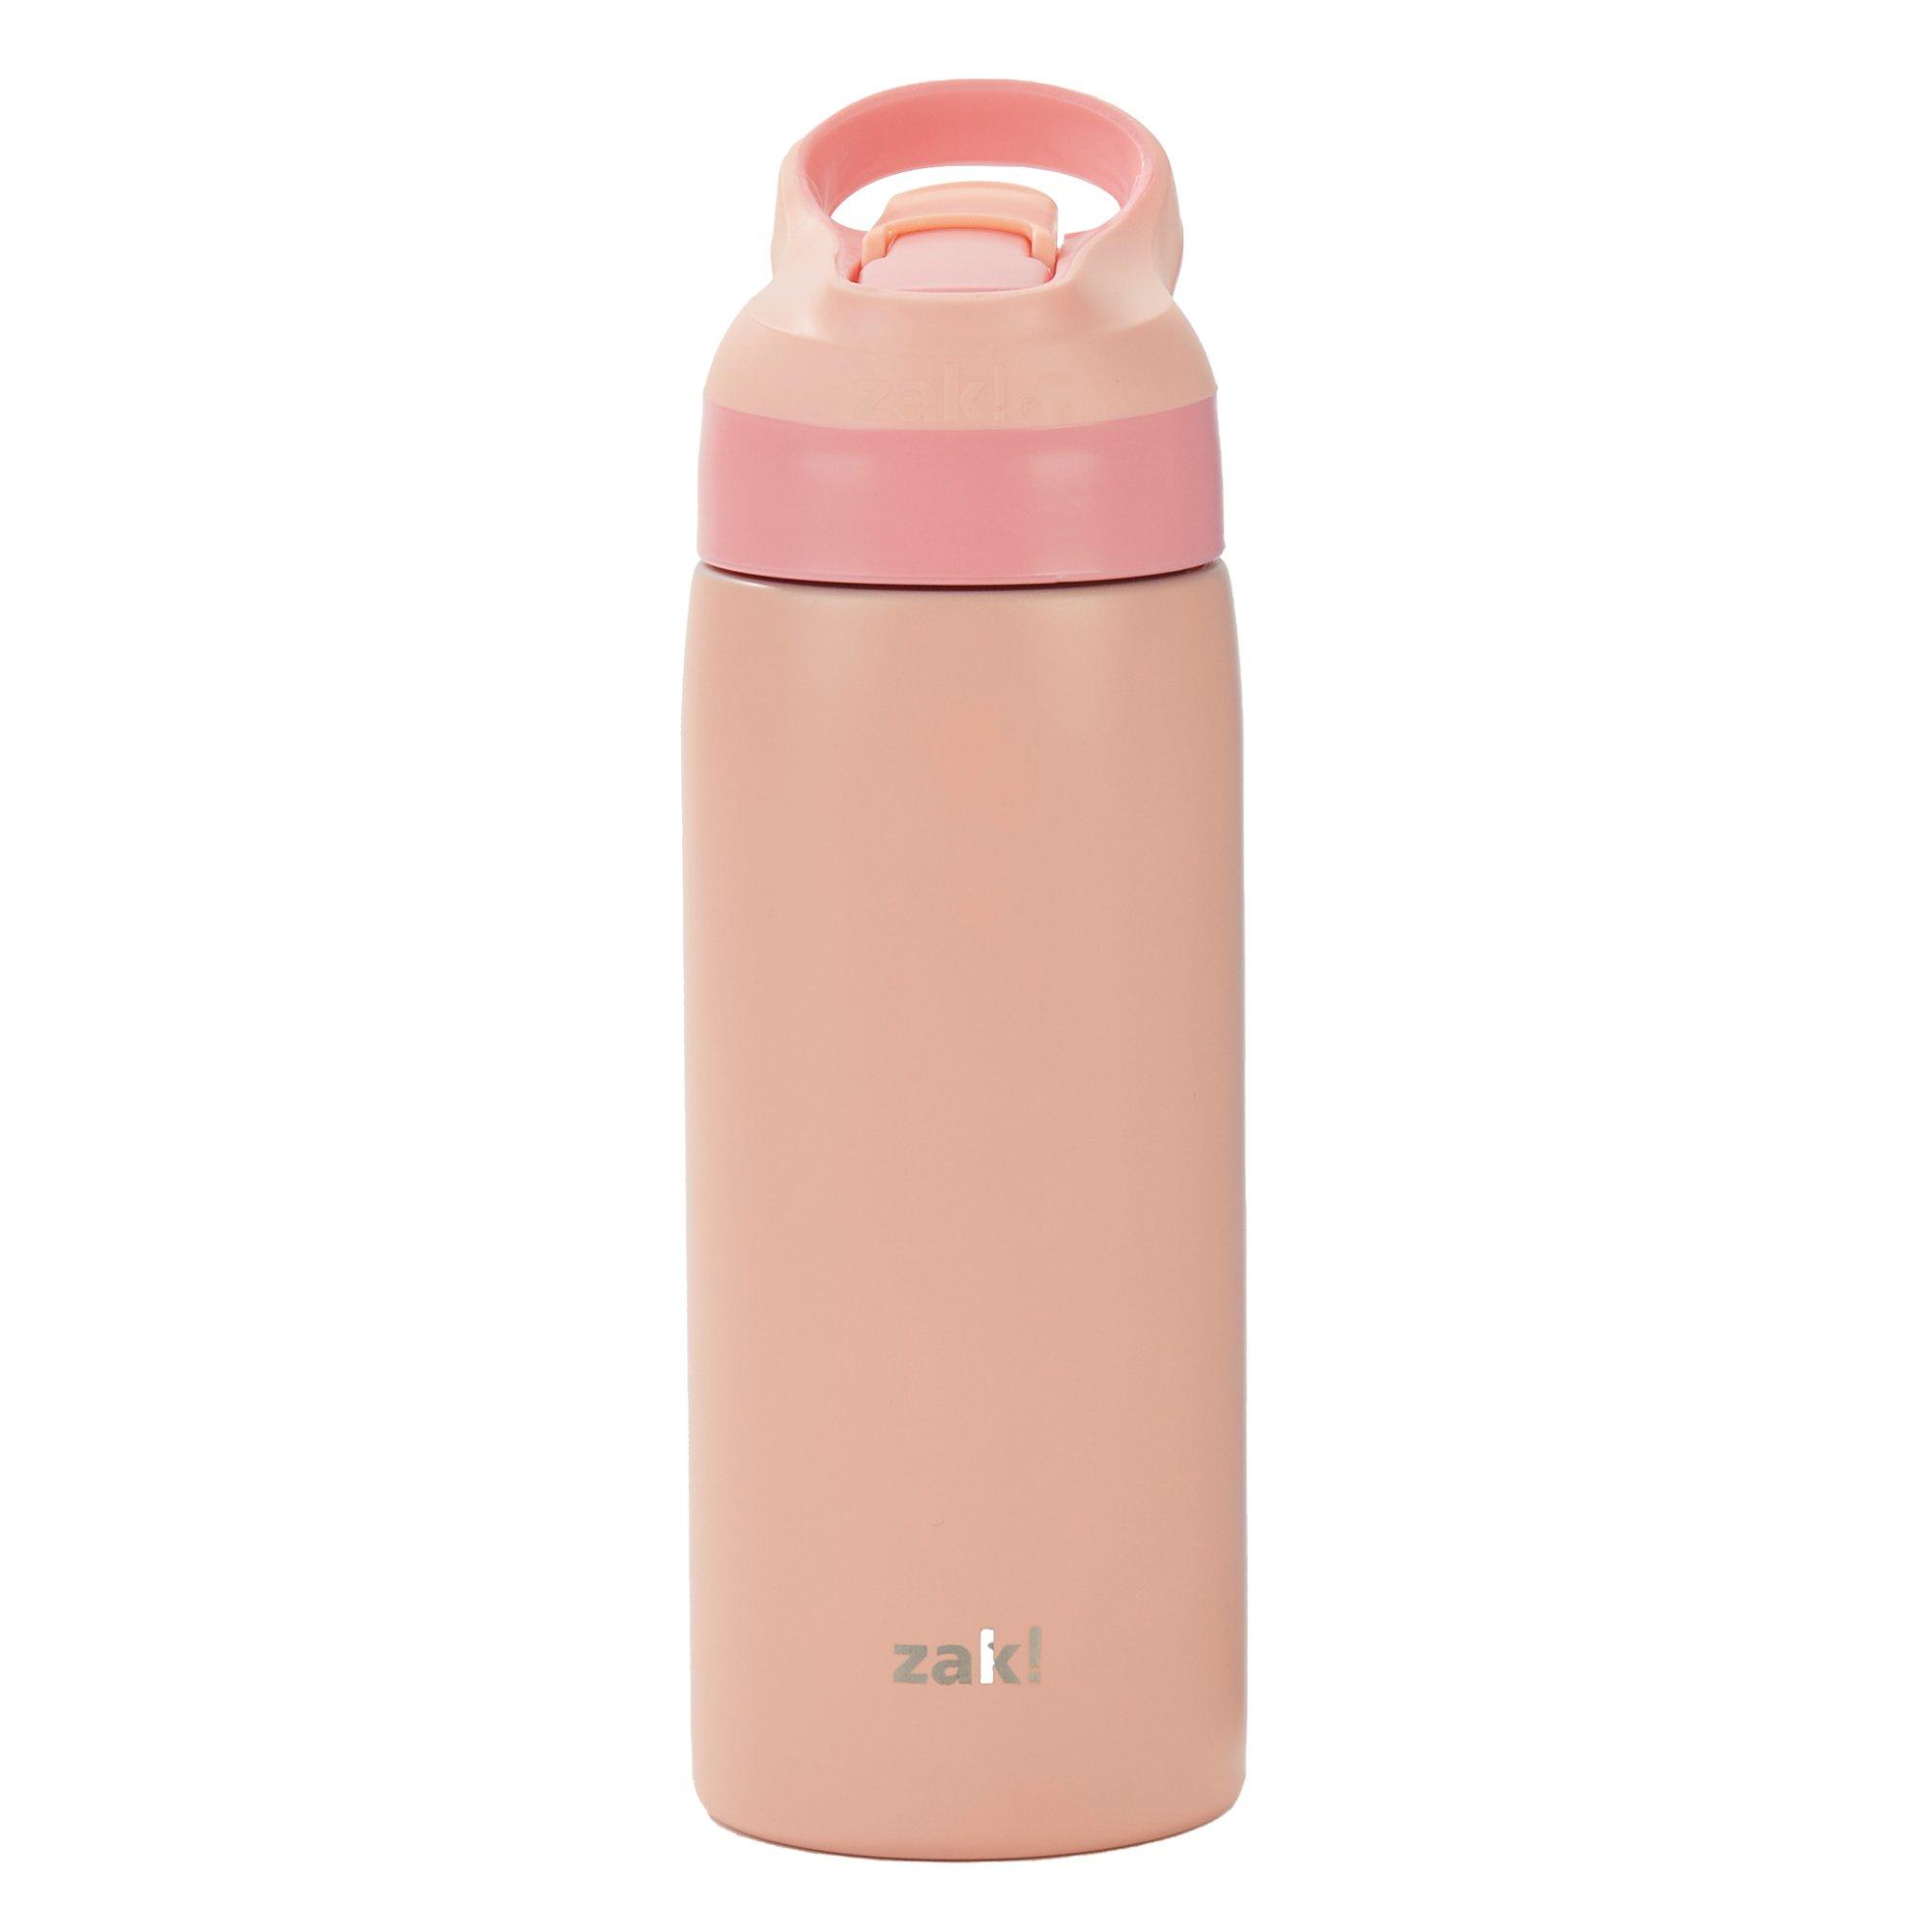 19oz Coral Stainless Steel Water Bottle